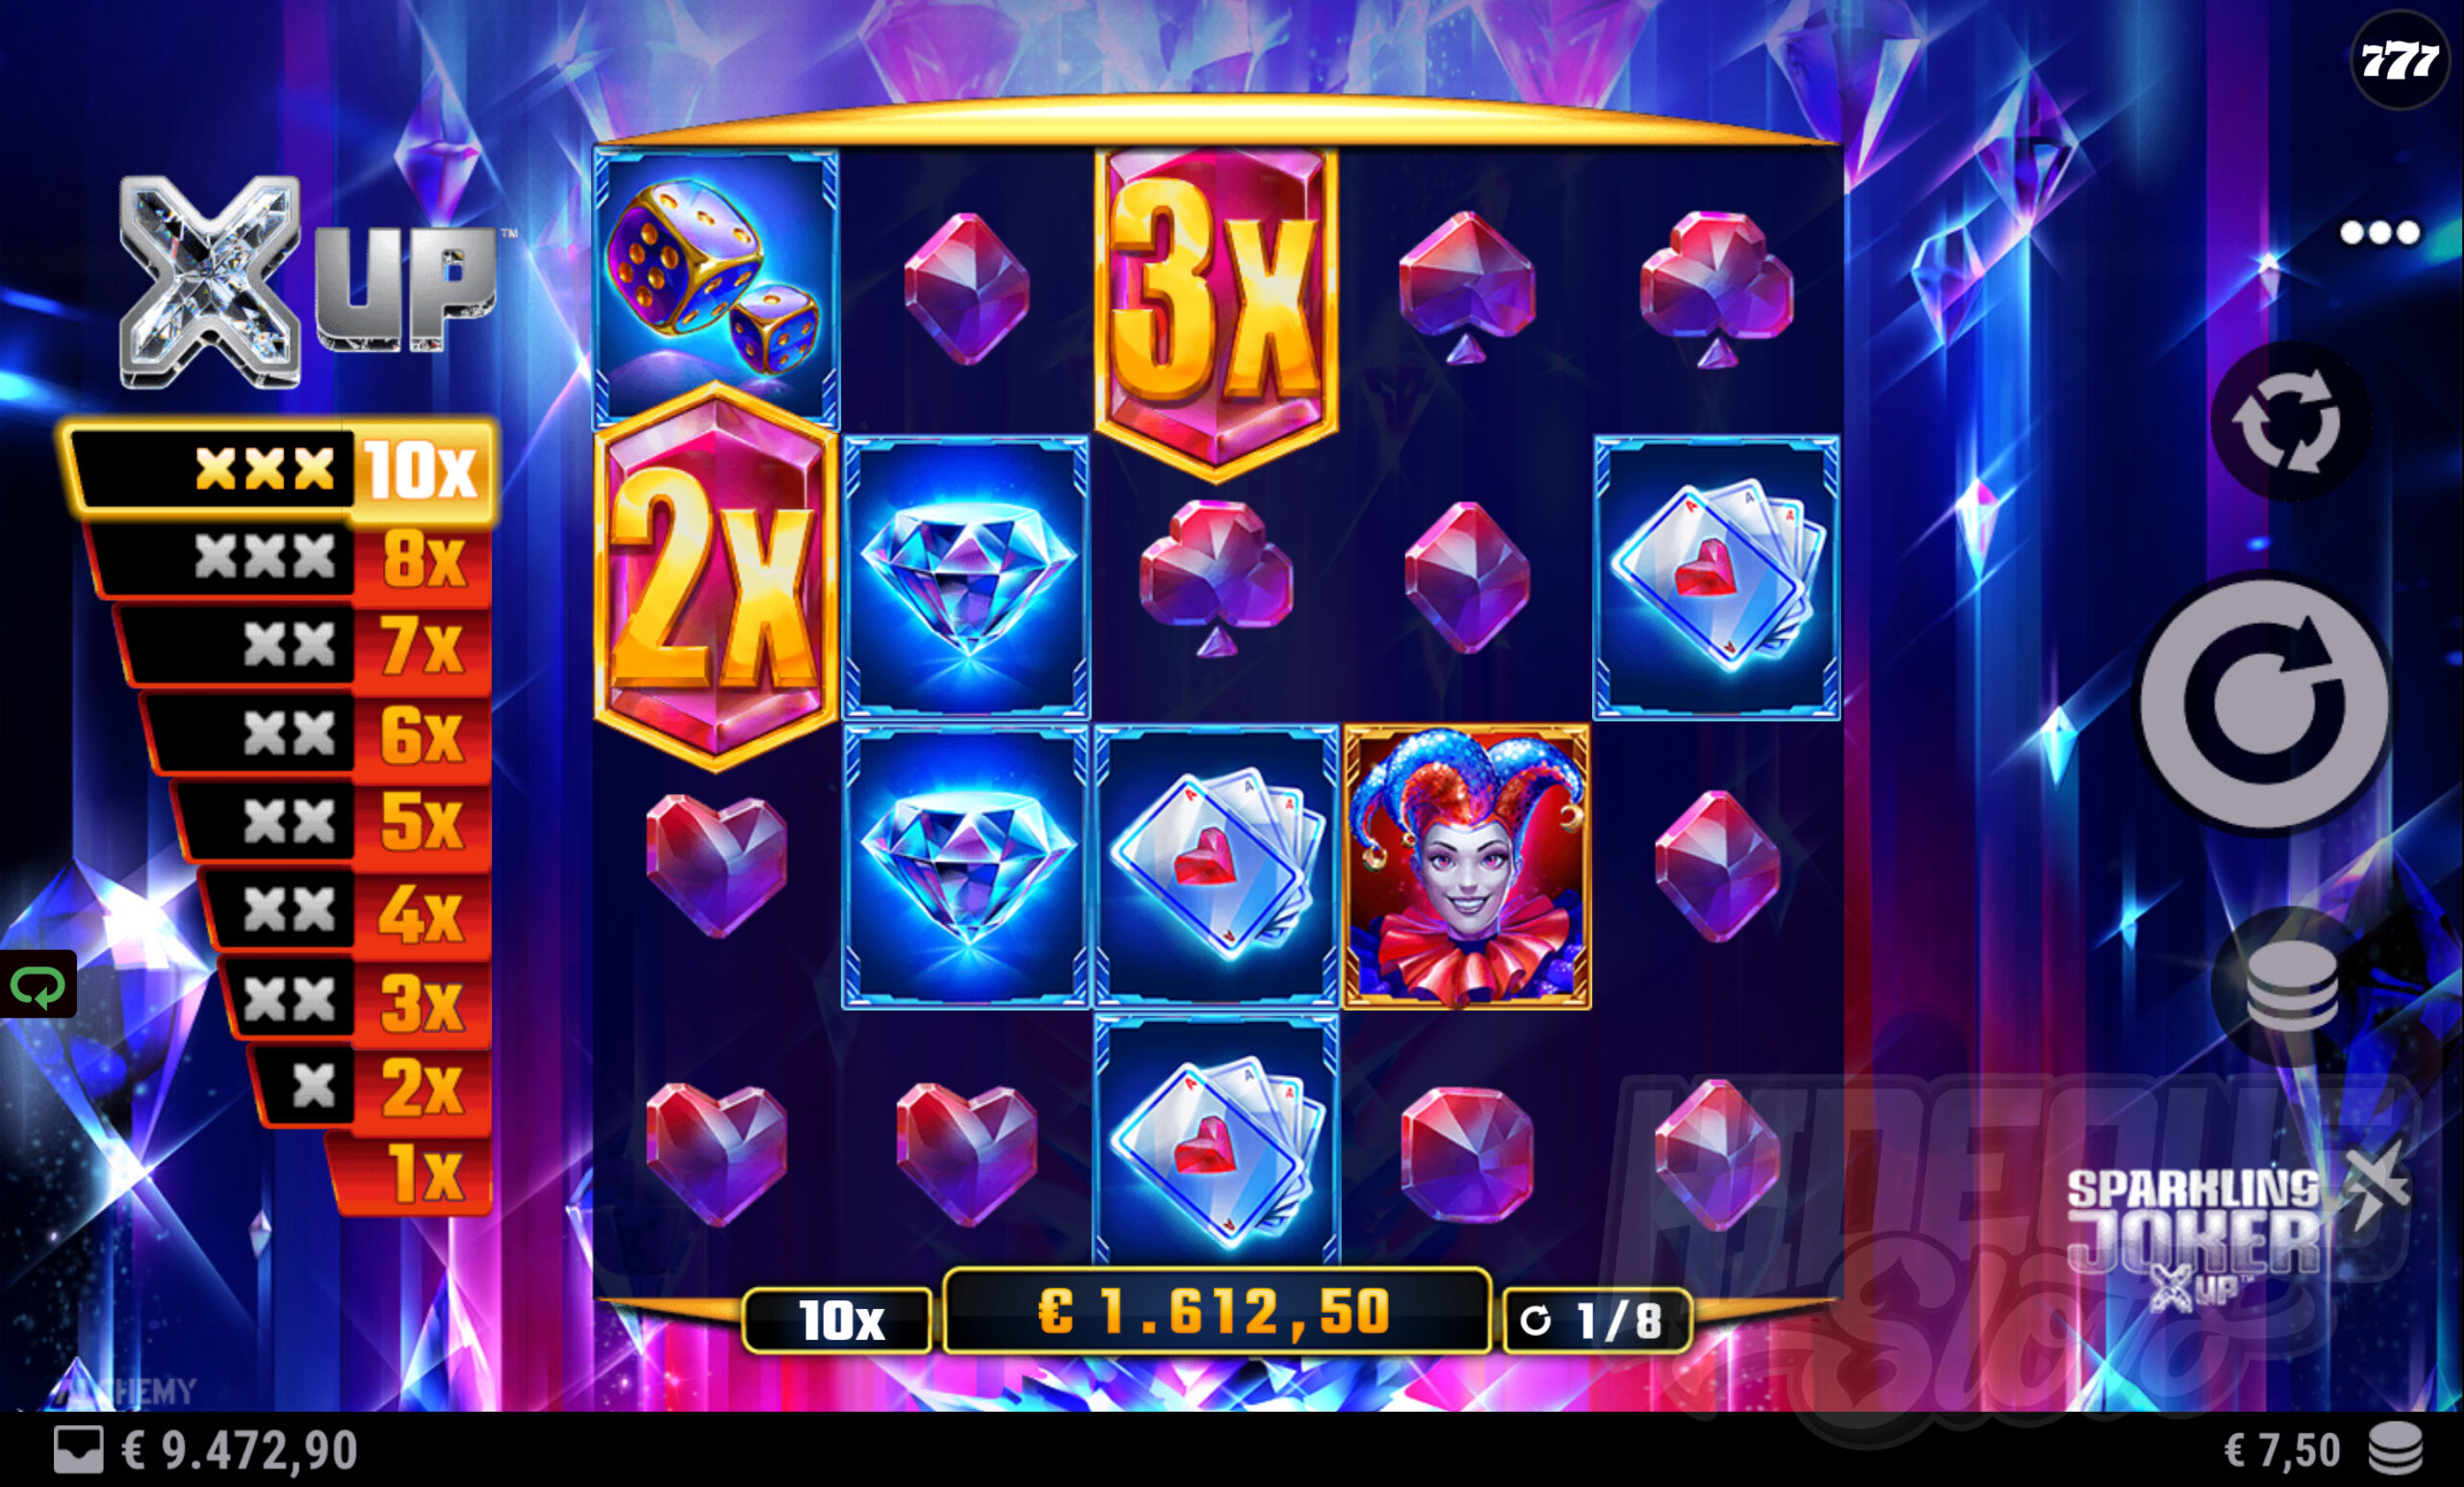 Wilds Can Land With Multipliers of x2, x3 or x5 in the Base Game and Free Spins